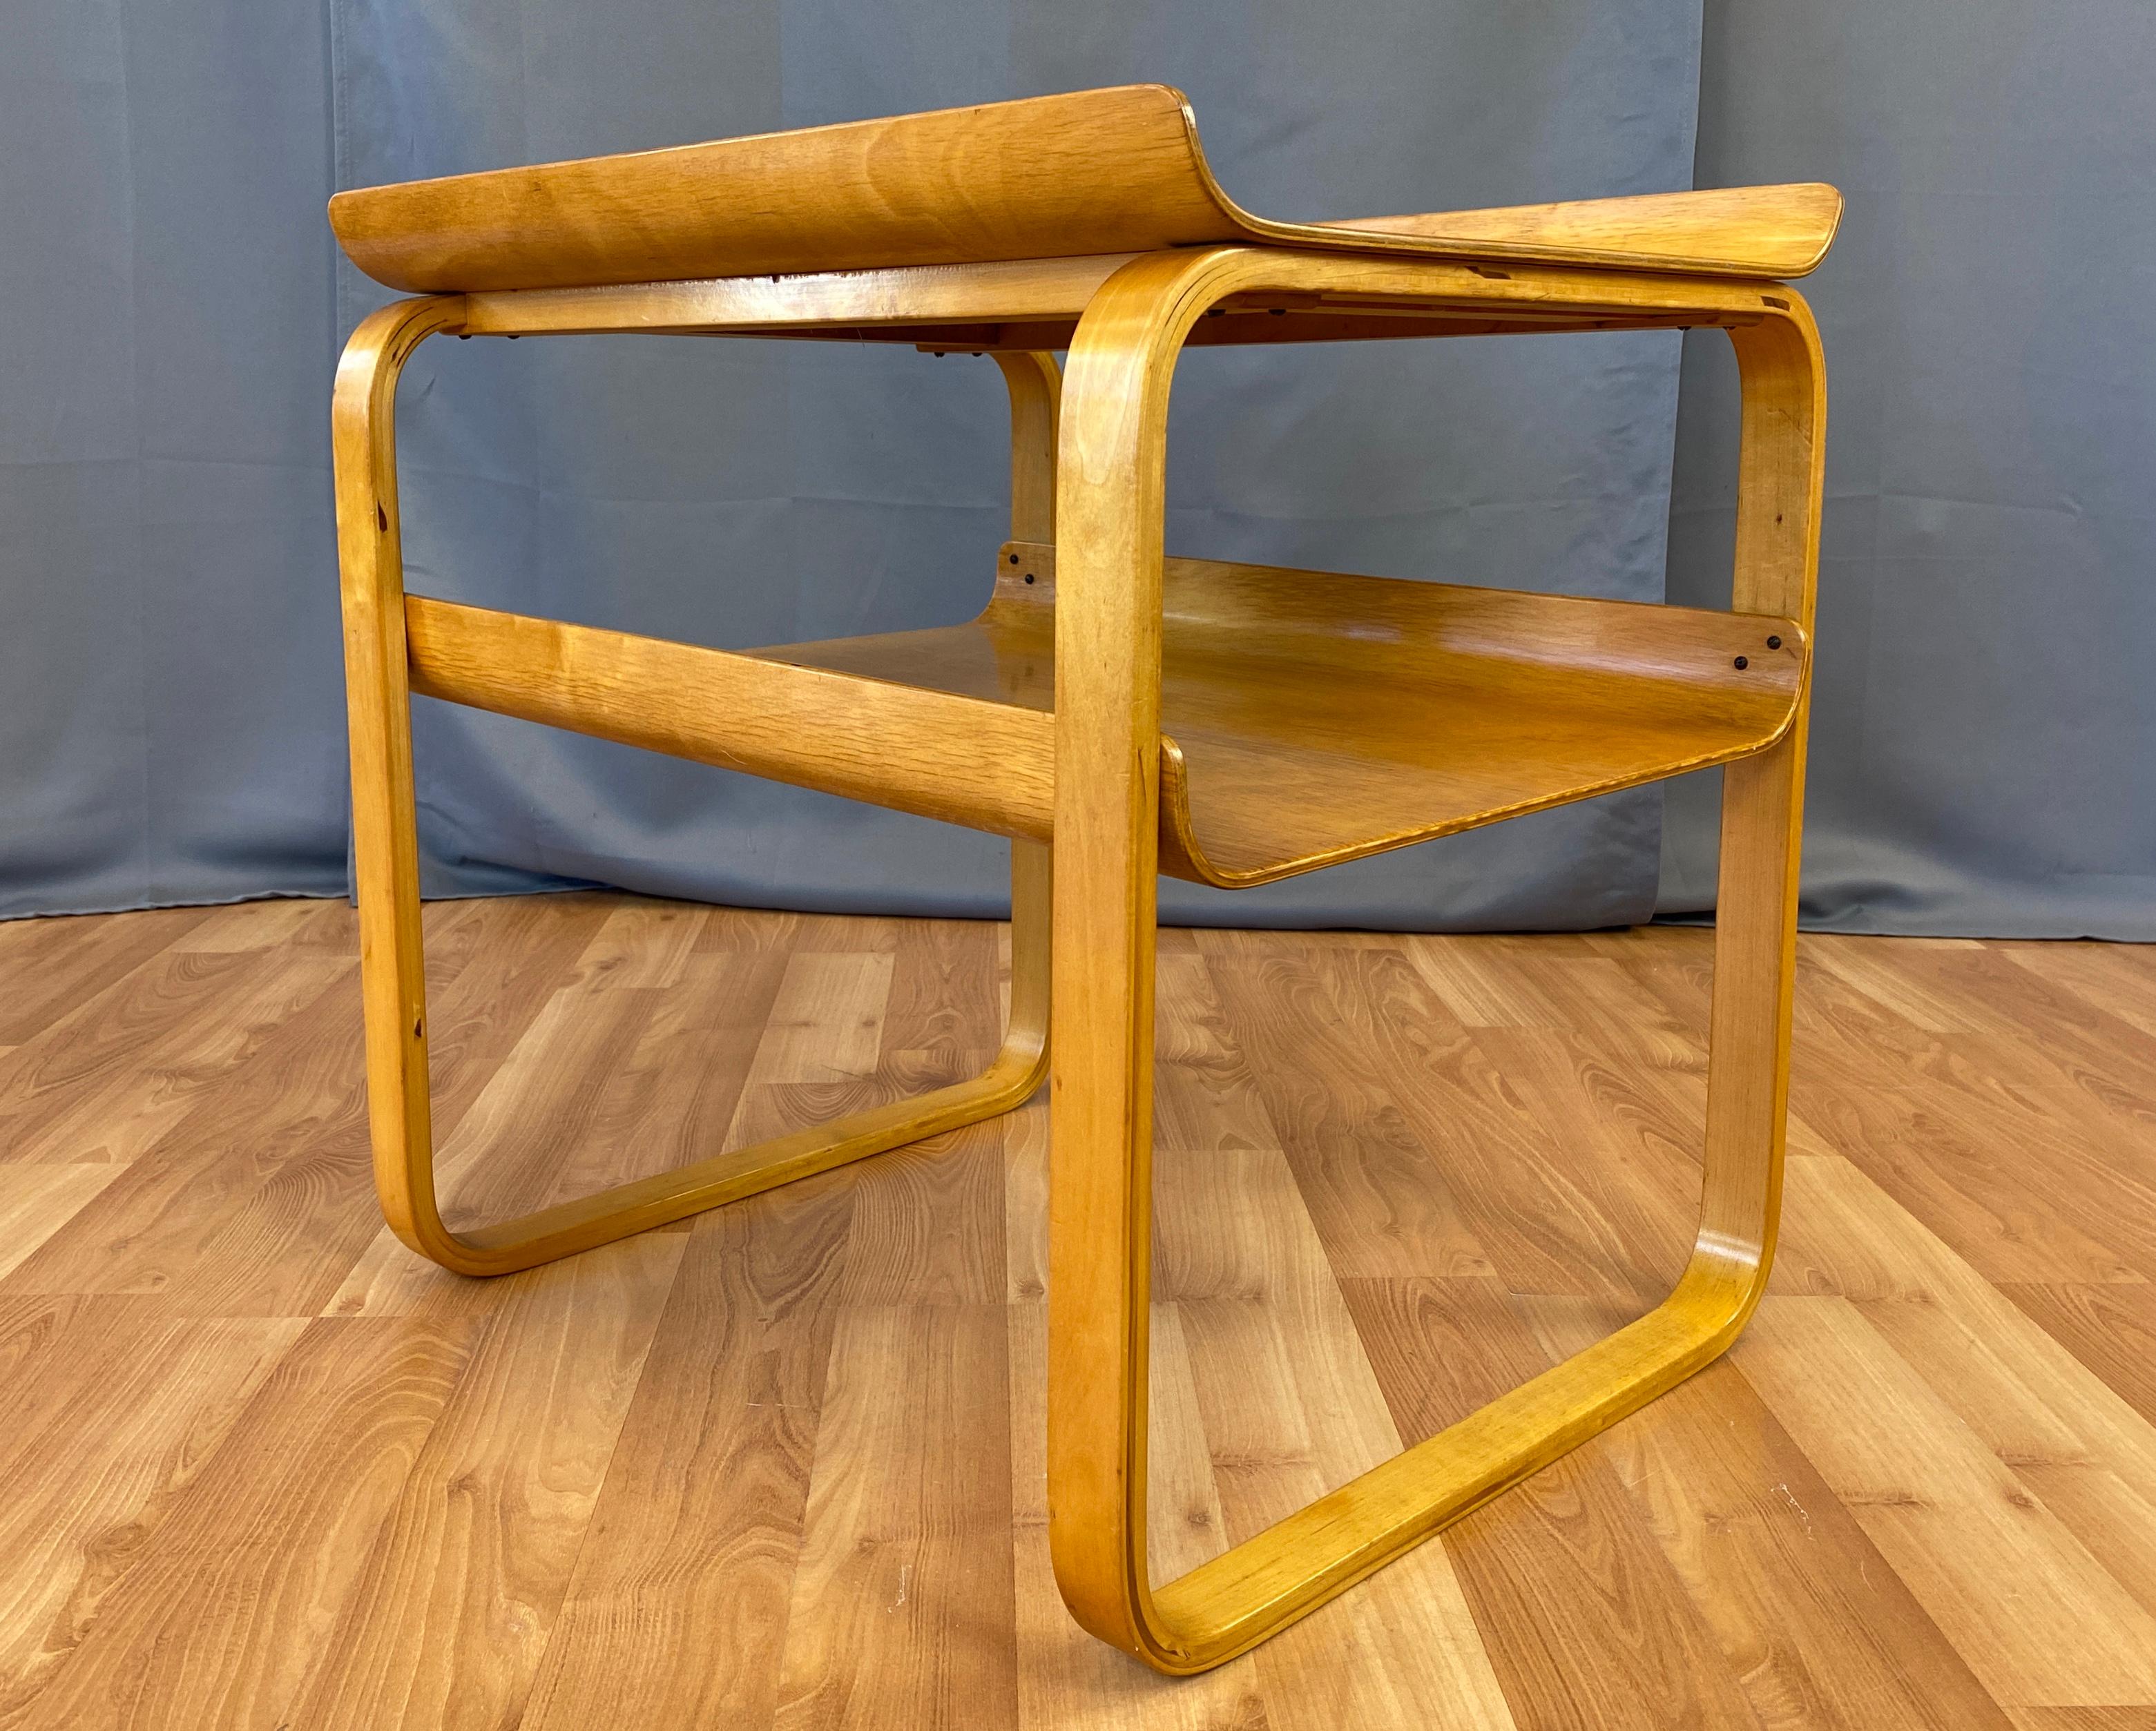 A late 1940s table by Alvar Aalto for O.Y. Huonekalu-ja Rakennustyötehdas A.B, Finland.
This two-tier occasional table, model no. 75, was designed for the Tuberculosis Sanatorium, Paimio Finland (which was also designed by Alvar